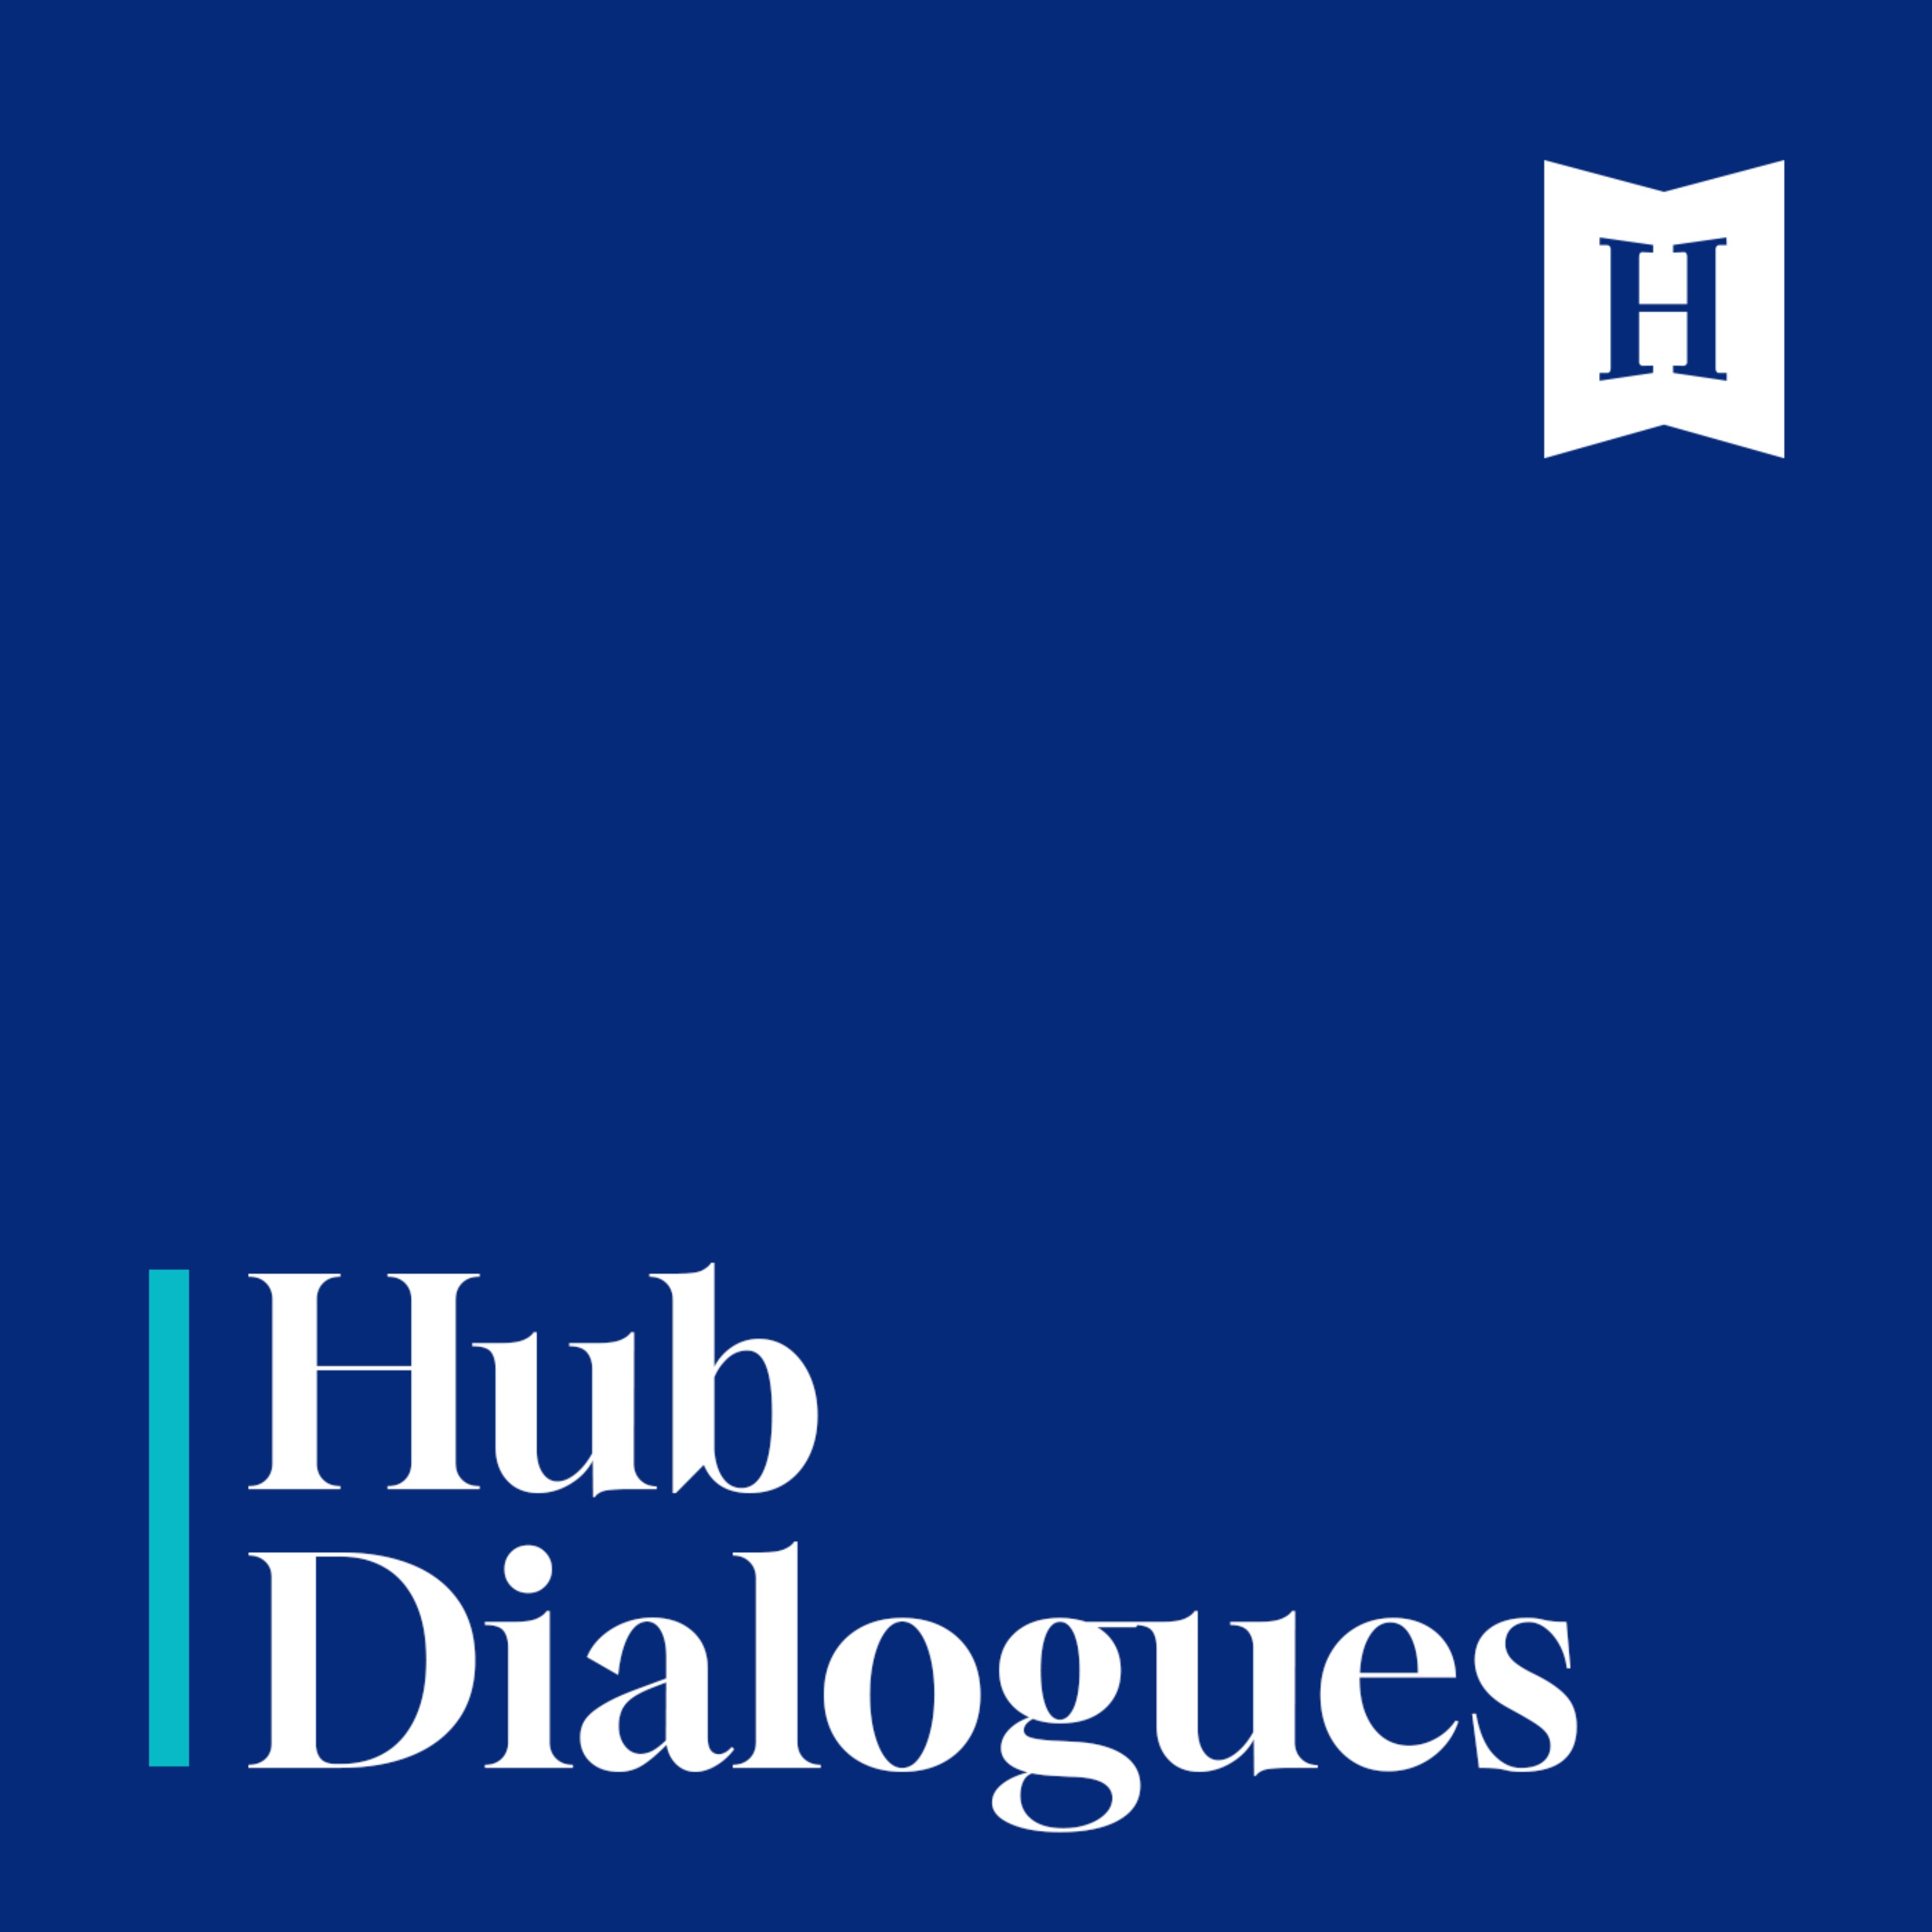 Hub Dialogues: Robert Atkinson on Canada's poor performance on advanced industry sectors